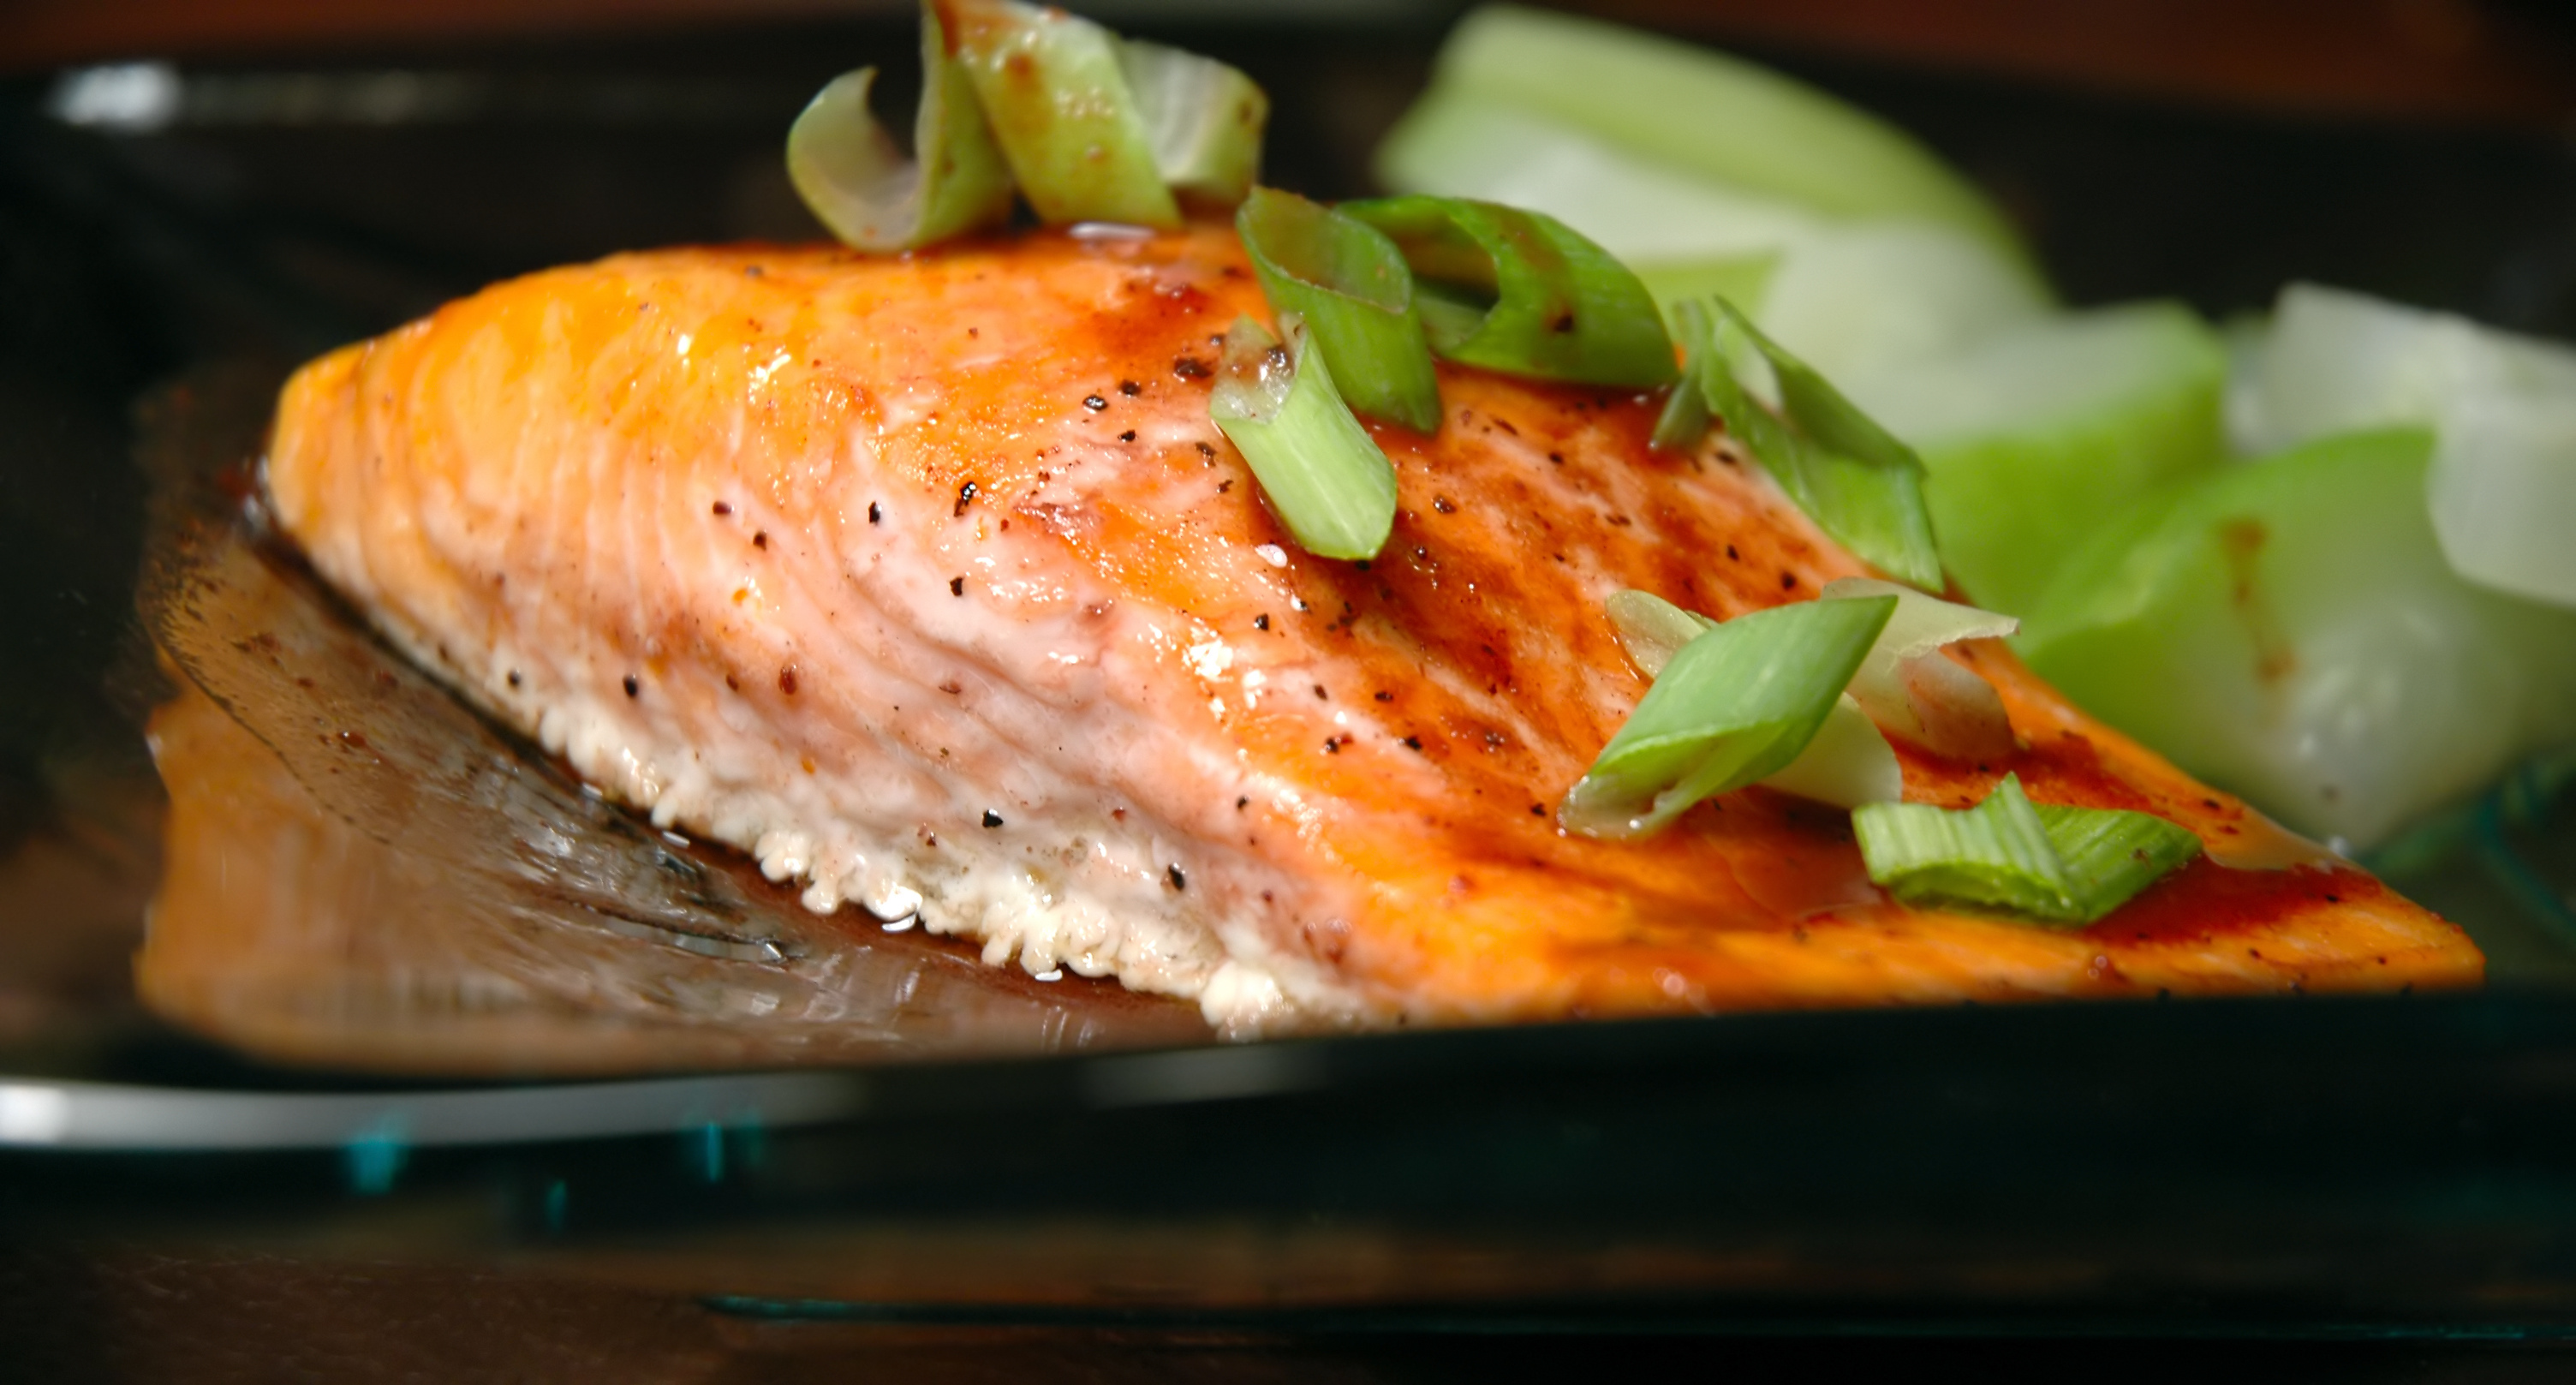 Top 5 Baked Salmon Recipes